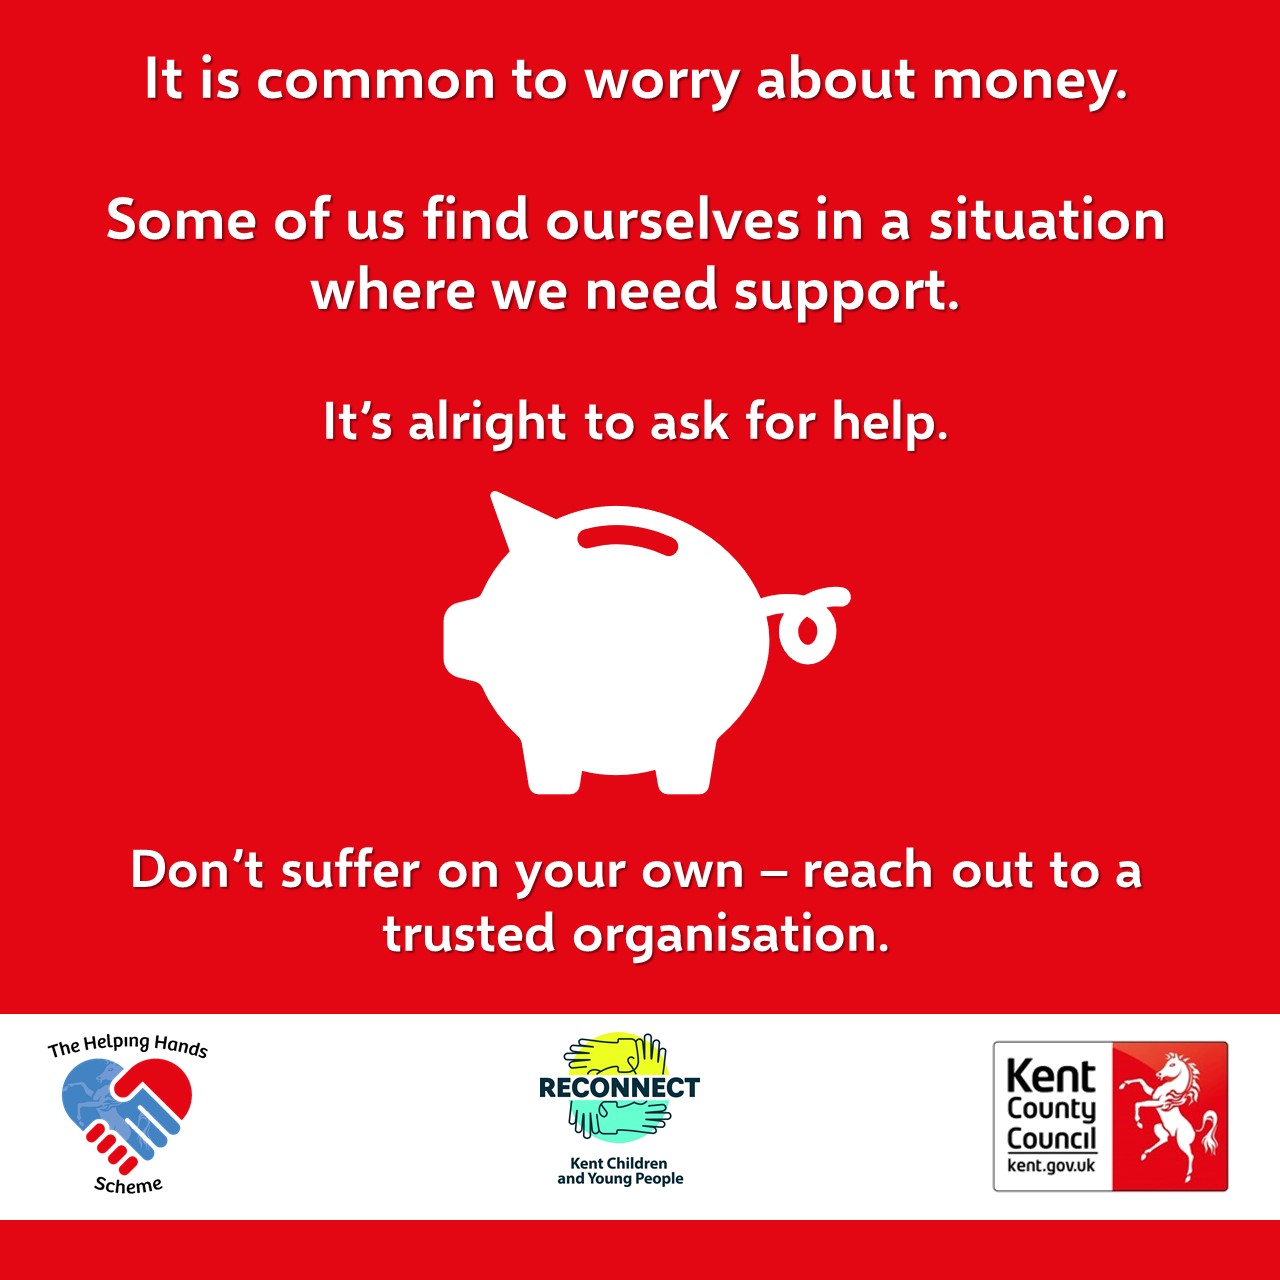 Financial hardship logo - It is common to worry about money. Some of us find ourselves in a situation where we need support. It's alright to ask for help. Don't suffer on your own - reach out to a trusted organisation.